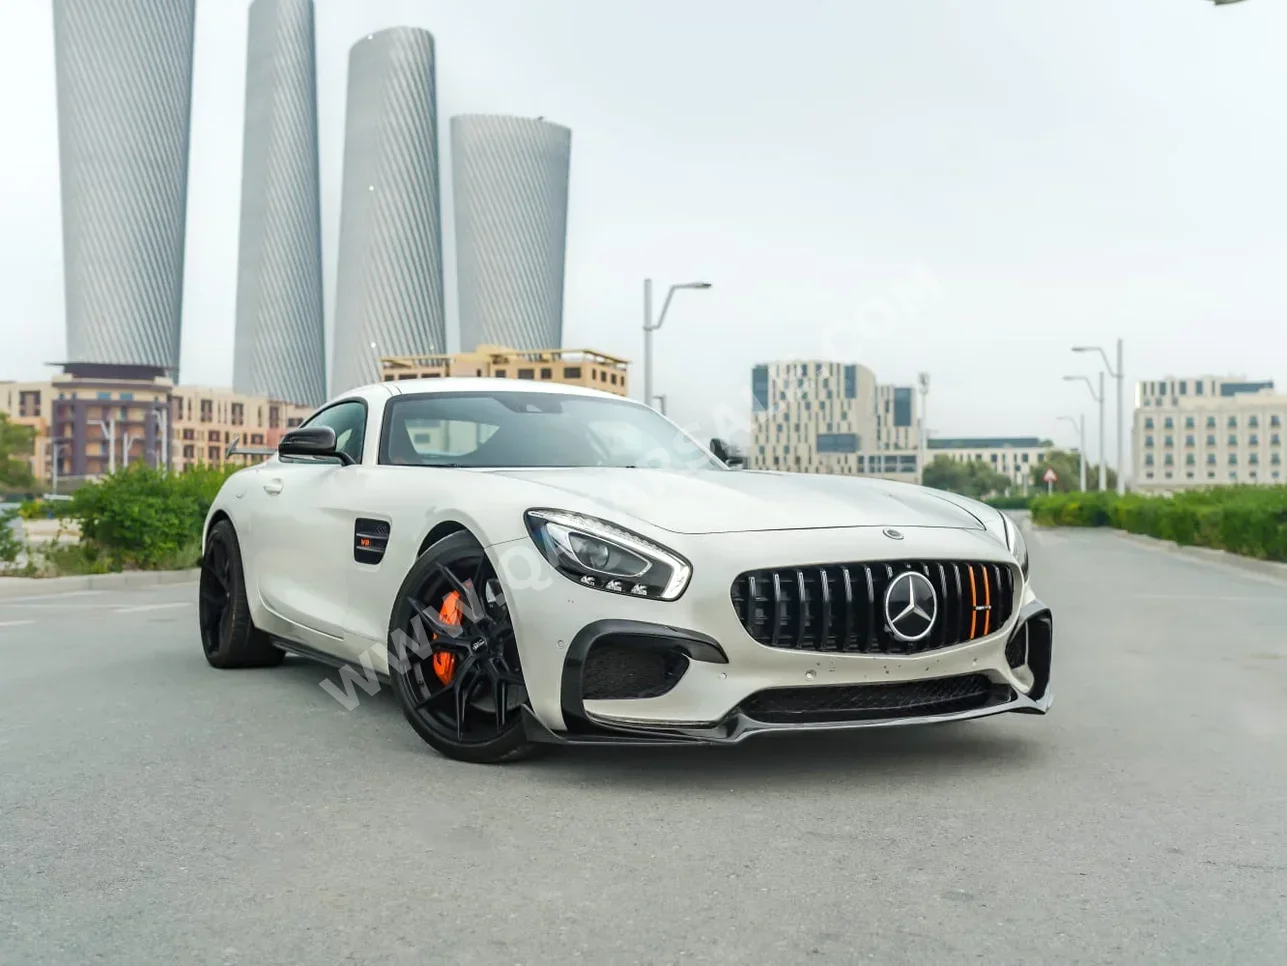 Mercedes-Benz  GT  S AMG  2016  Automatic  108,000 Km  8 Cylinder  Rear Wheel Drive (RWD)  Coupe / Sport  White